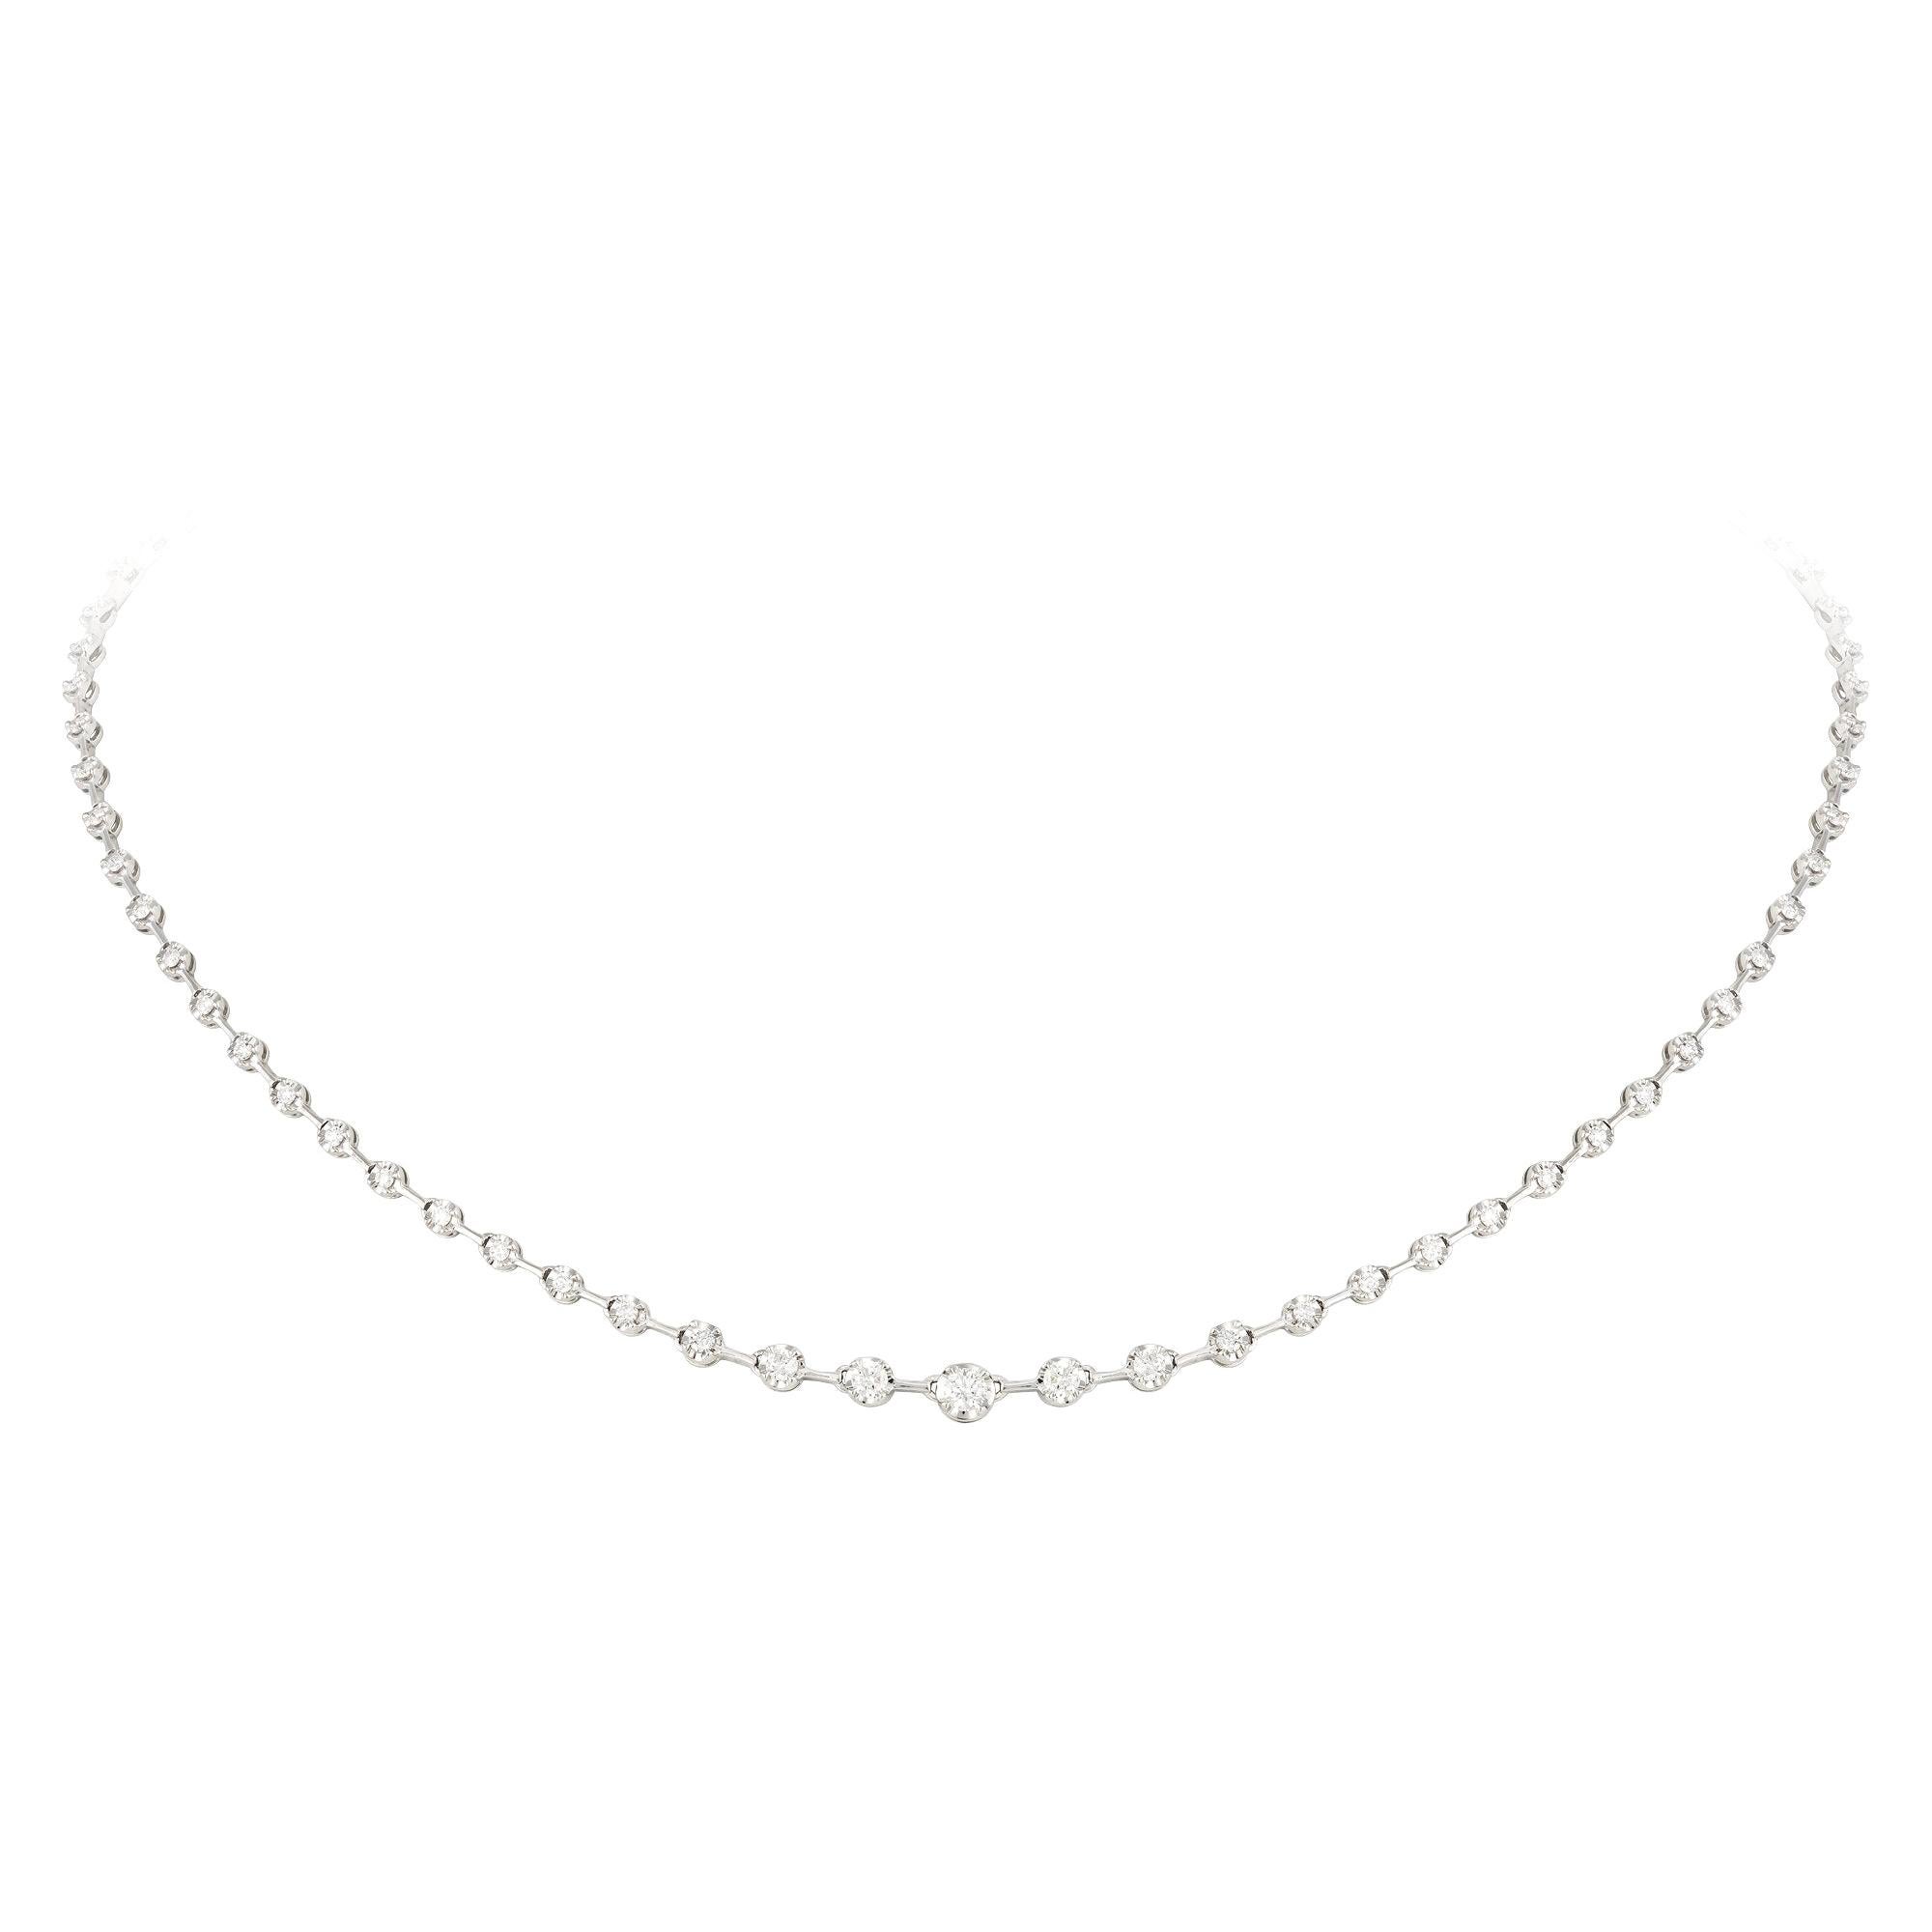 Best Seller Graduation Style Diamond Necklace 18k White Gold for Her For Sale